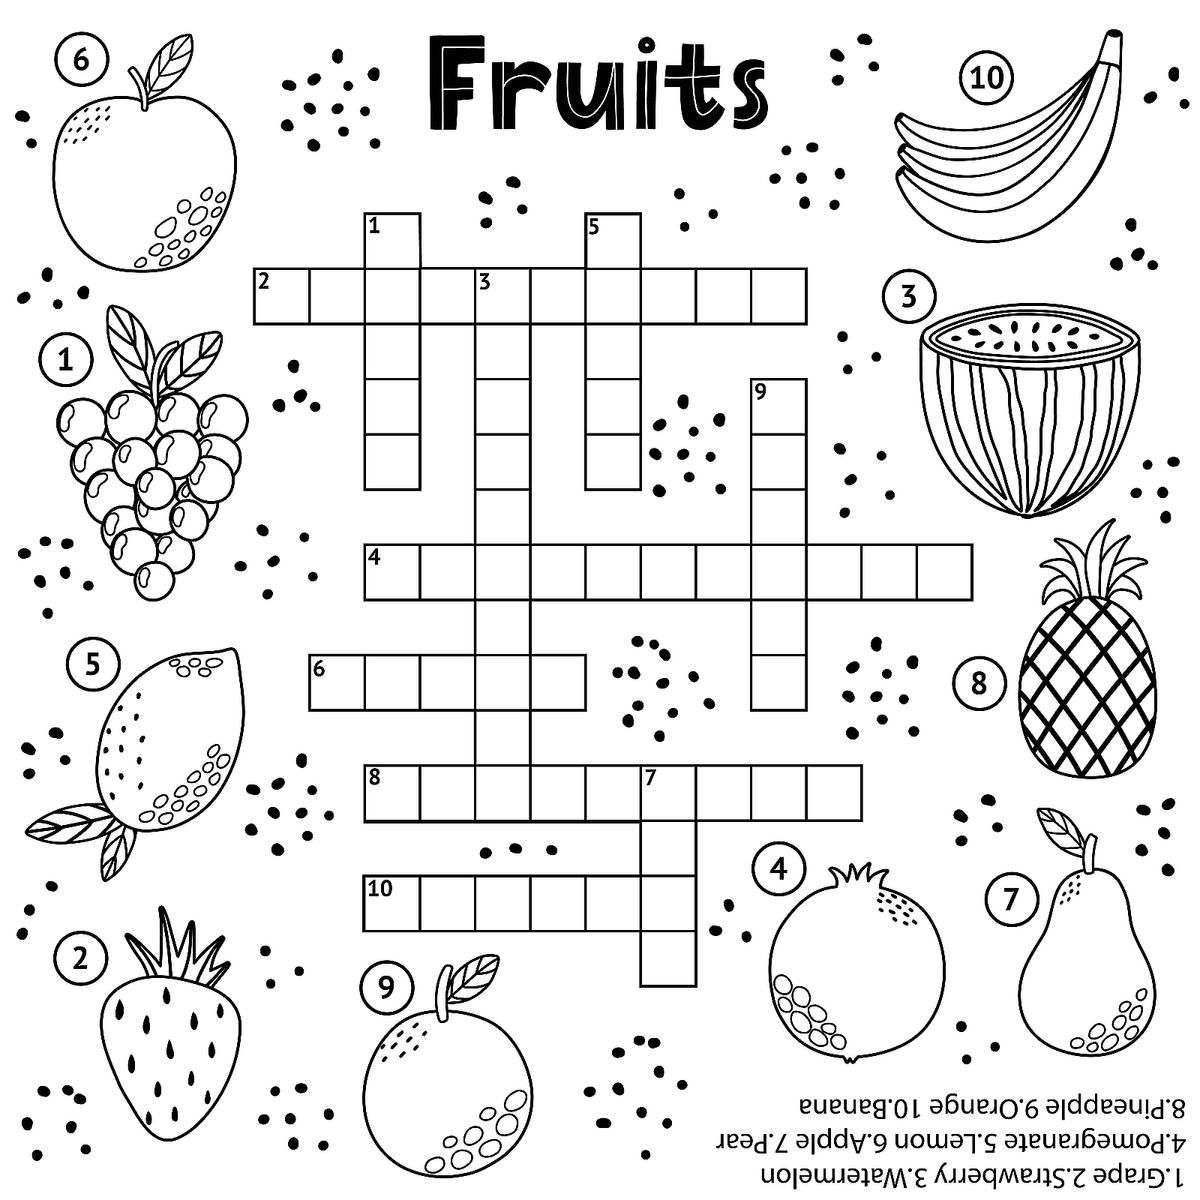 Crossword puzzles for kids fun free printable crossword puzzle coloring page activities for children printables seconds mom printable crossword puzzles word puzzles for kids free printable crossword puzzles